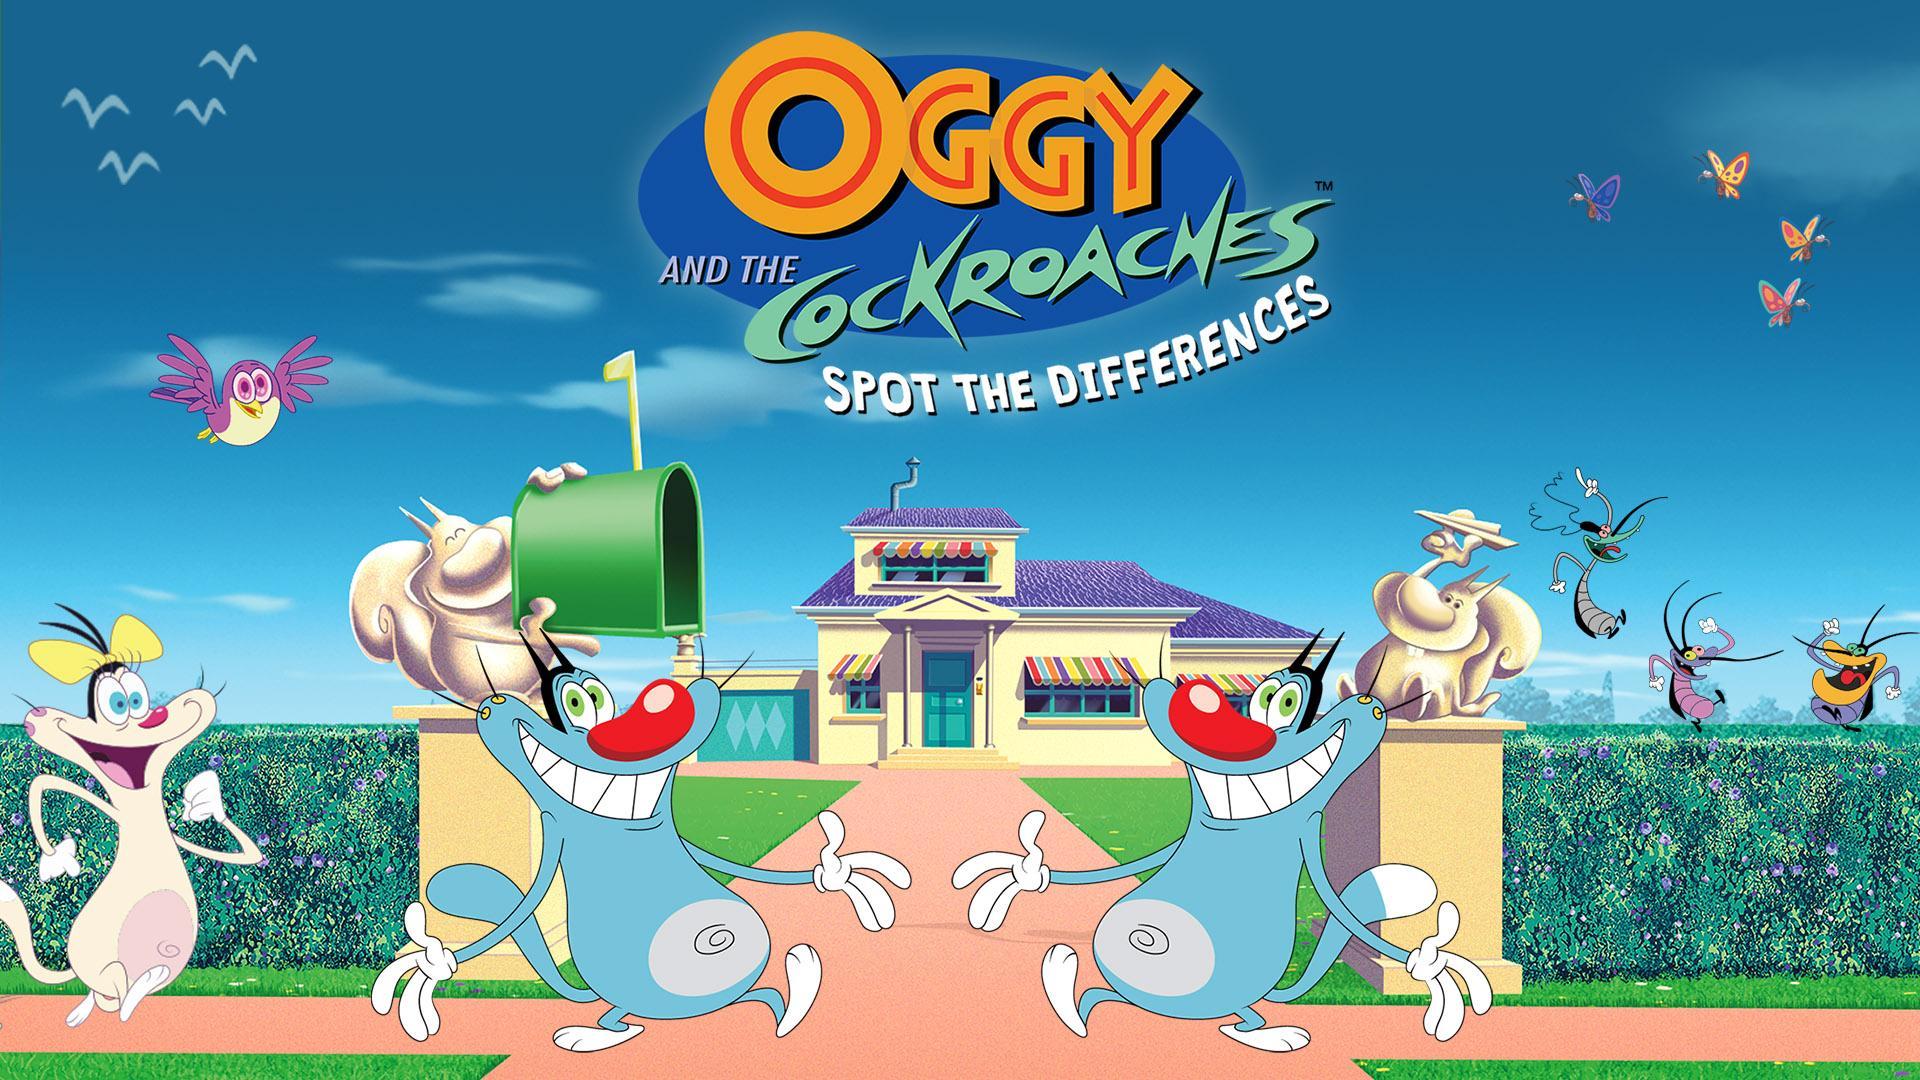 Screenshot 1 of Oggy and the Cockroaches - Spo 